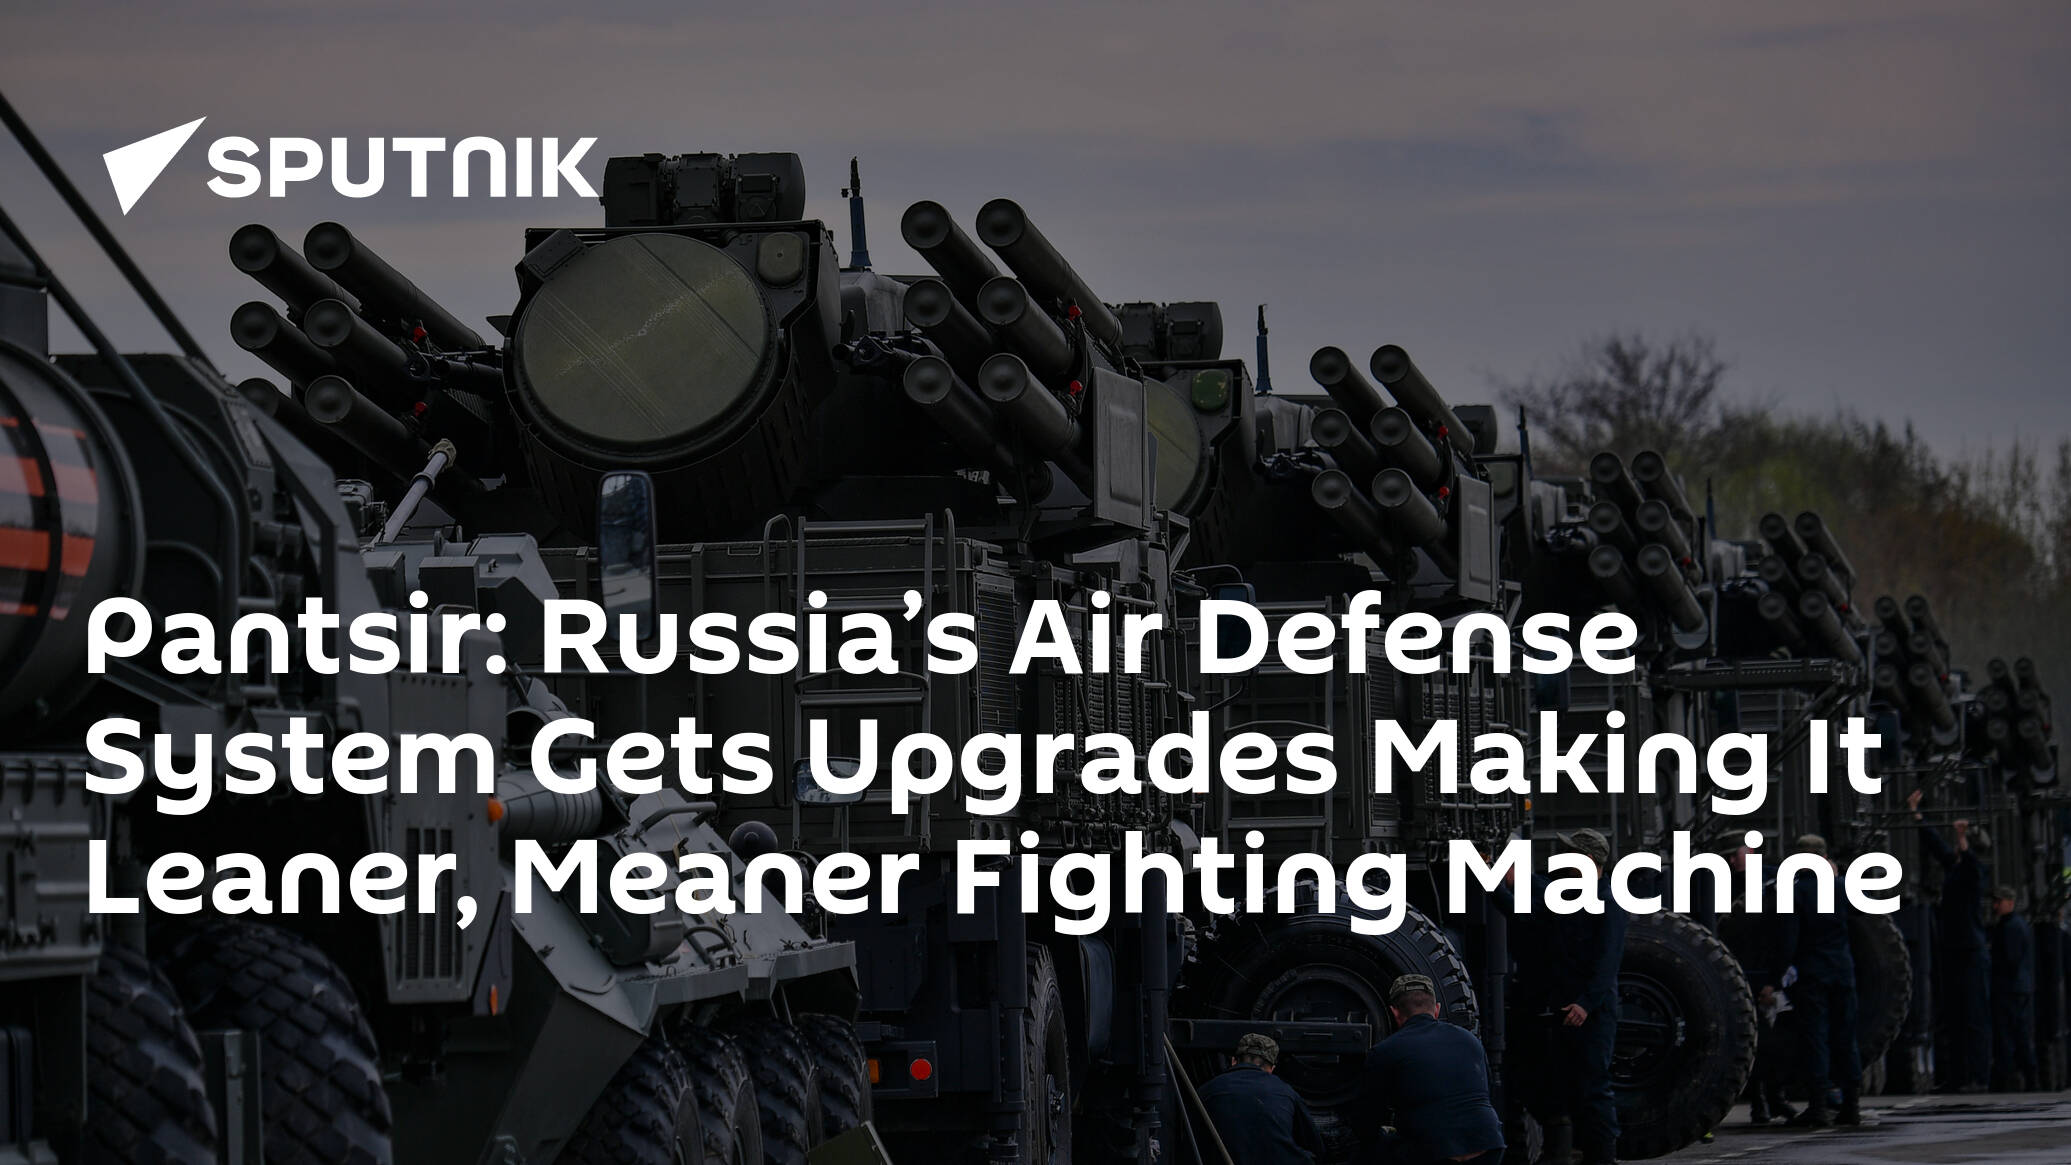 Pantsir: Russia’s Air Defense System Gets Upgrades Making It Leaner, Meaner Fighting Machine